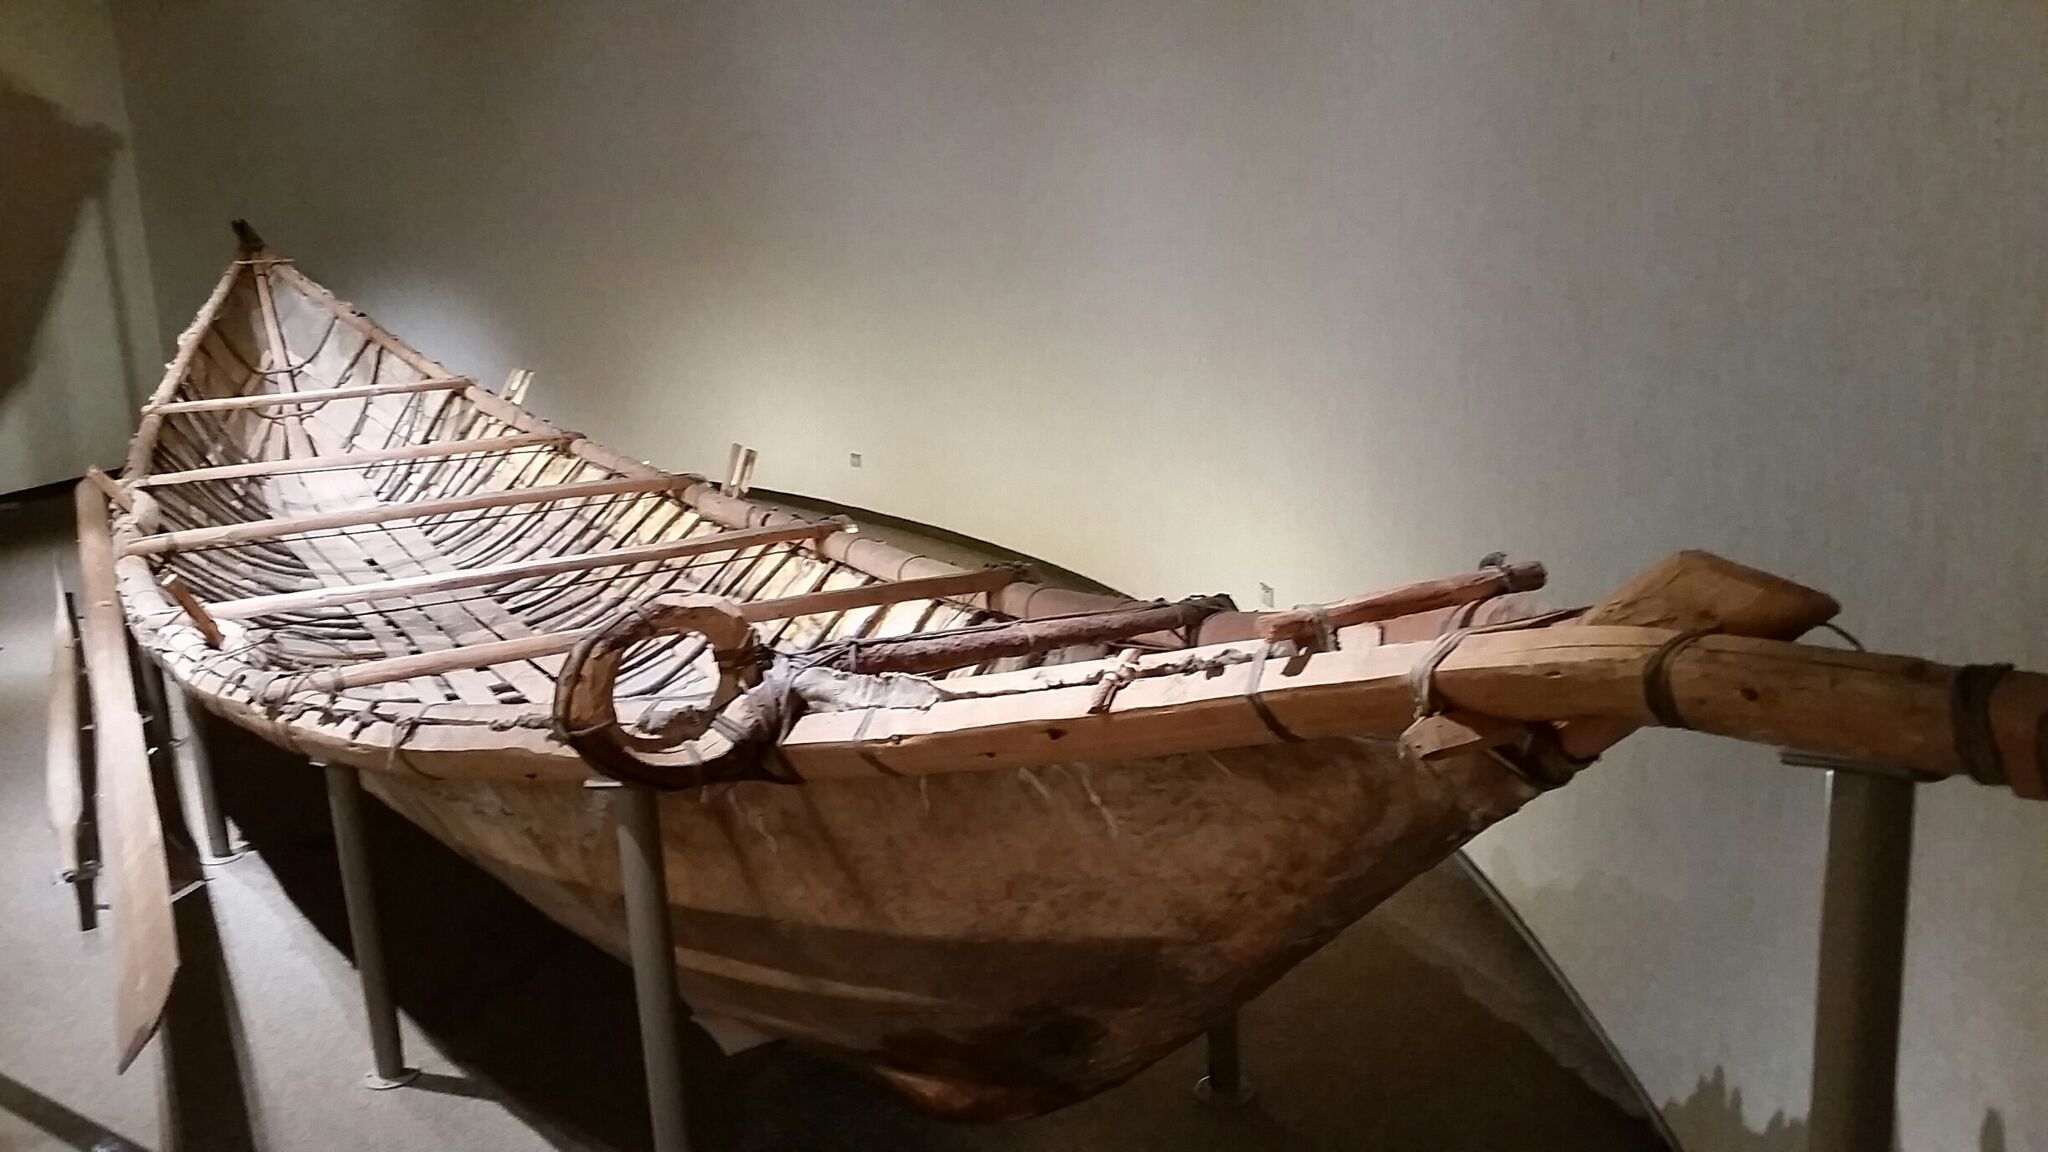 A preserved mooseskin boat (a large wide canoe) on display at the Prince of Wales Northern Heritage Centre